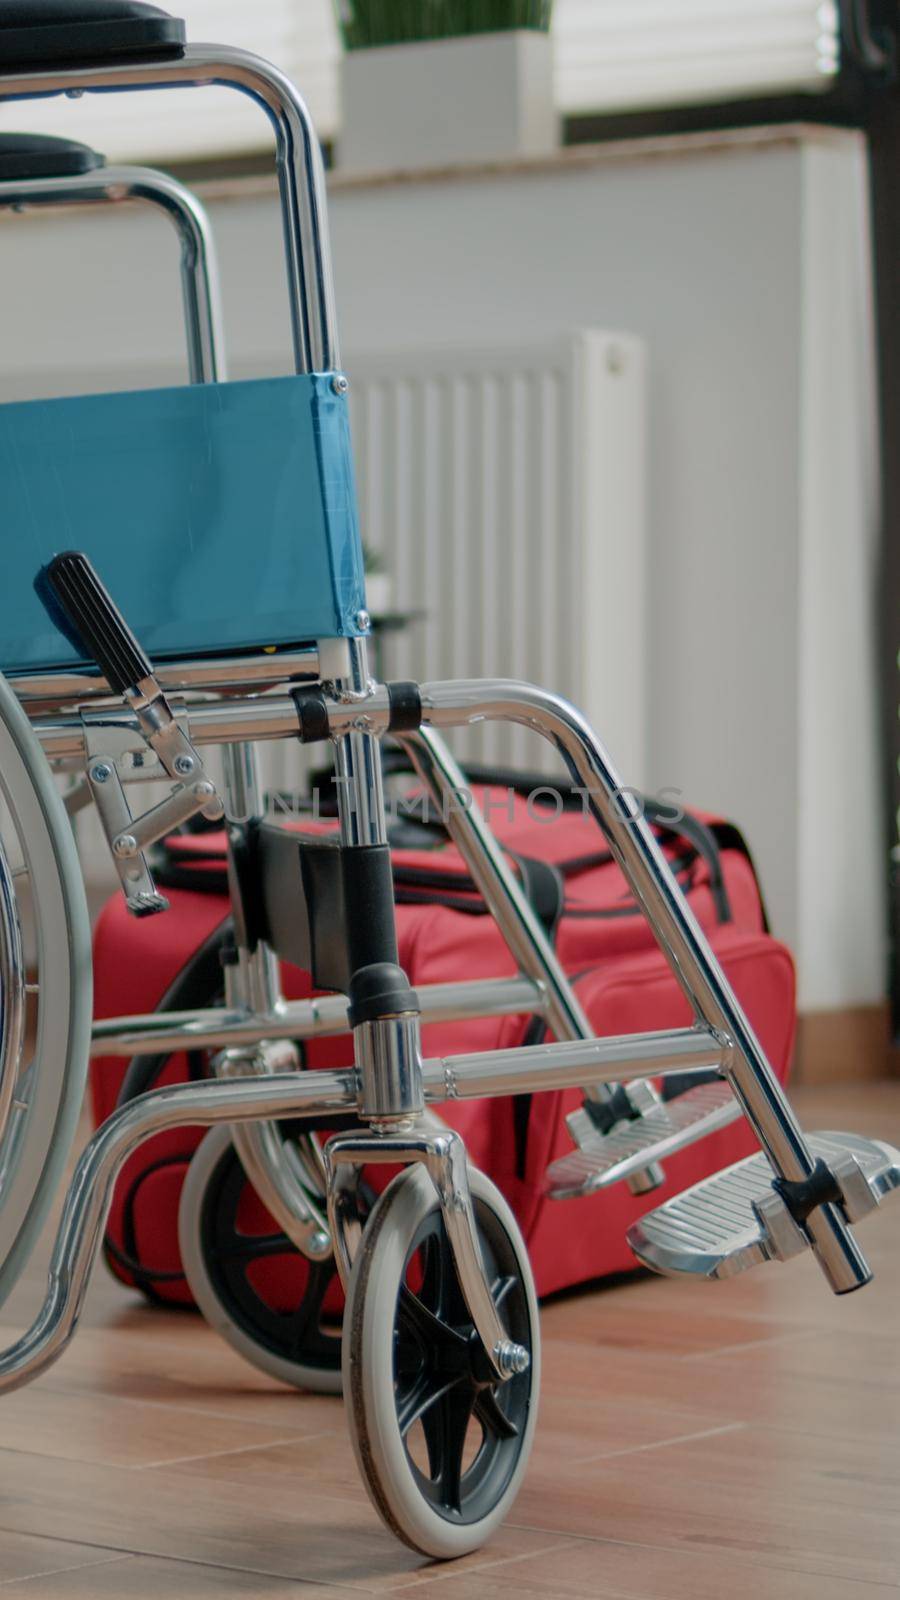 Nobody in nursing home room with transportation support by DCStudio